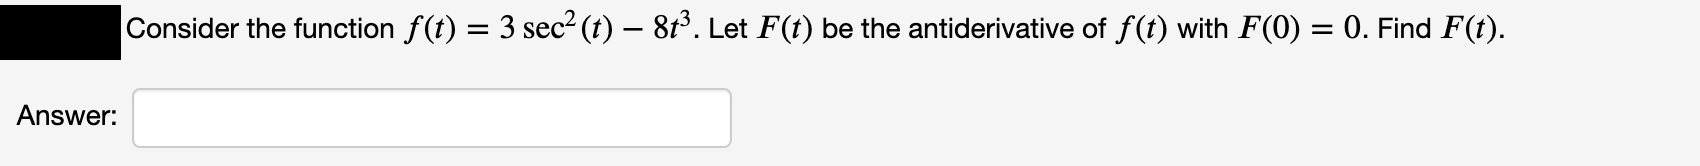 Consider the function f(t) = 3 sec² (t) – 8t°. Let F(t) be the antiderivative of f(t) with F(0) = 0. Find F(t).
Answer:
